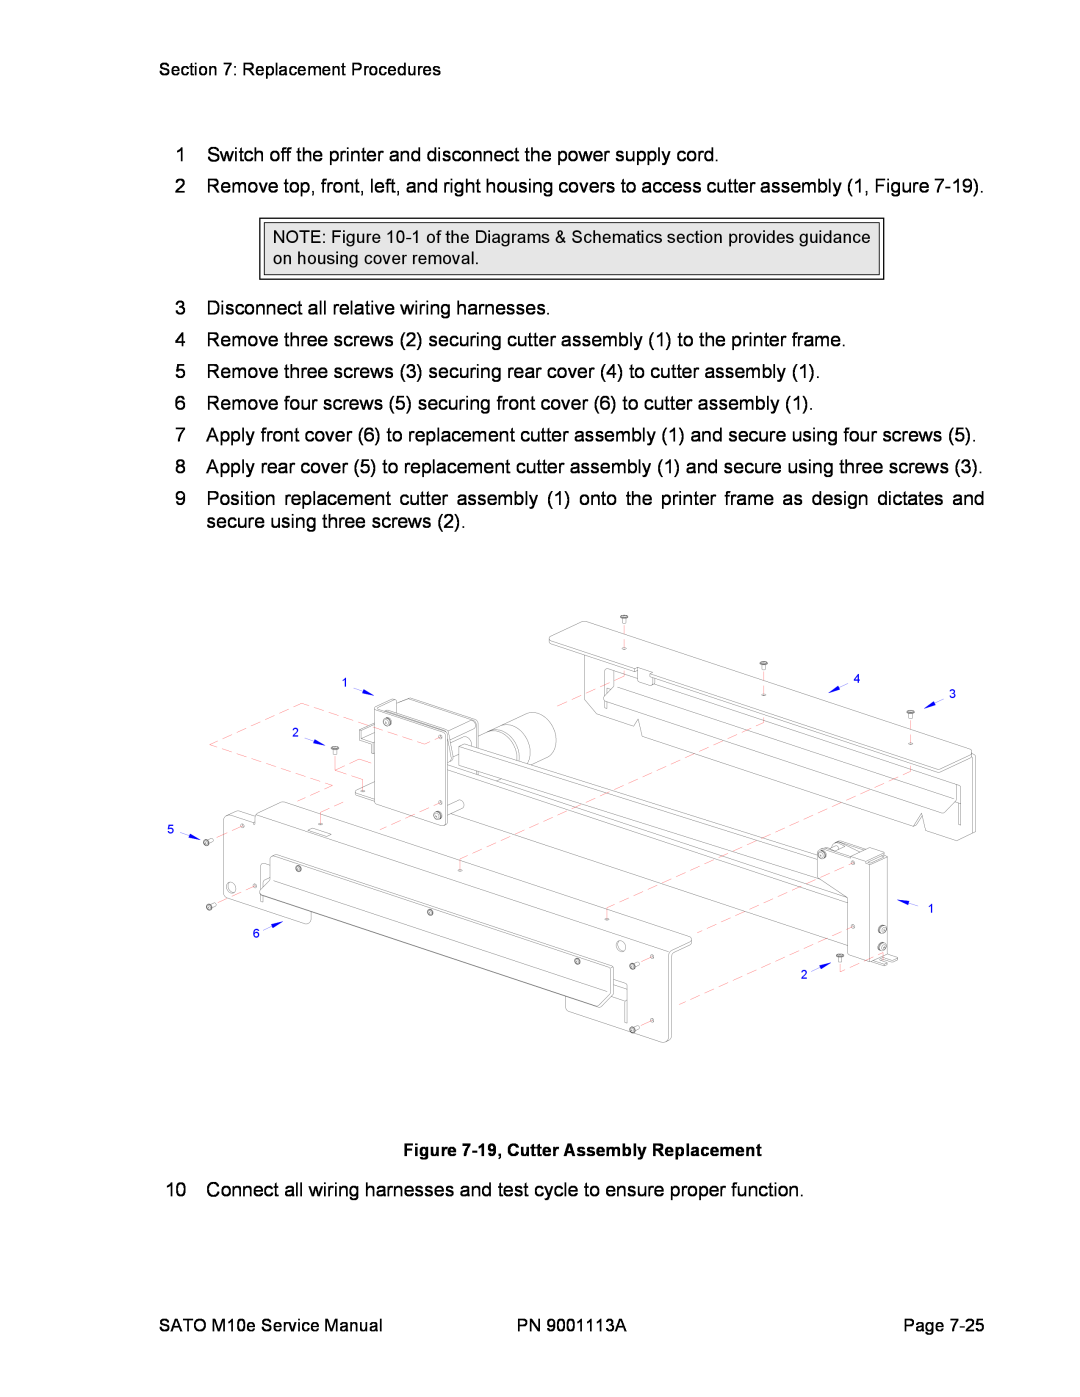 SATO 10e service manual 19, Cutter Assembly Replacement 